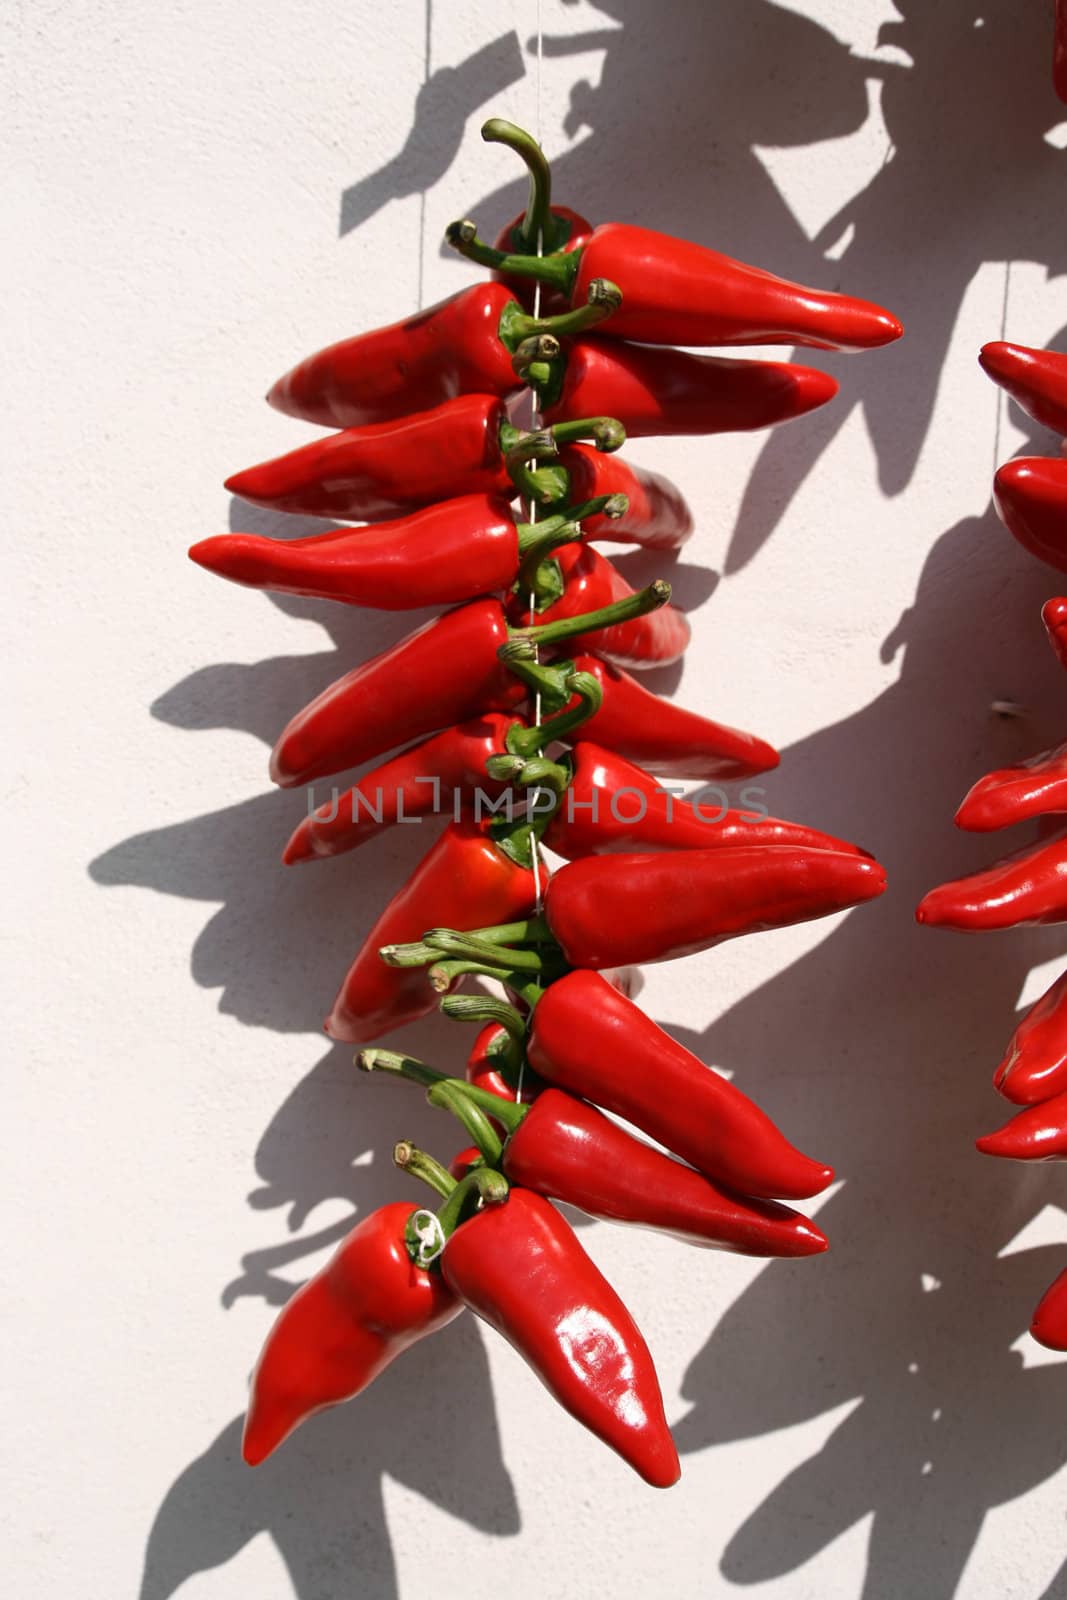 red peppers bunch drying on a wall